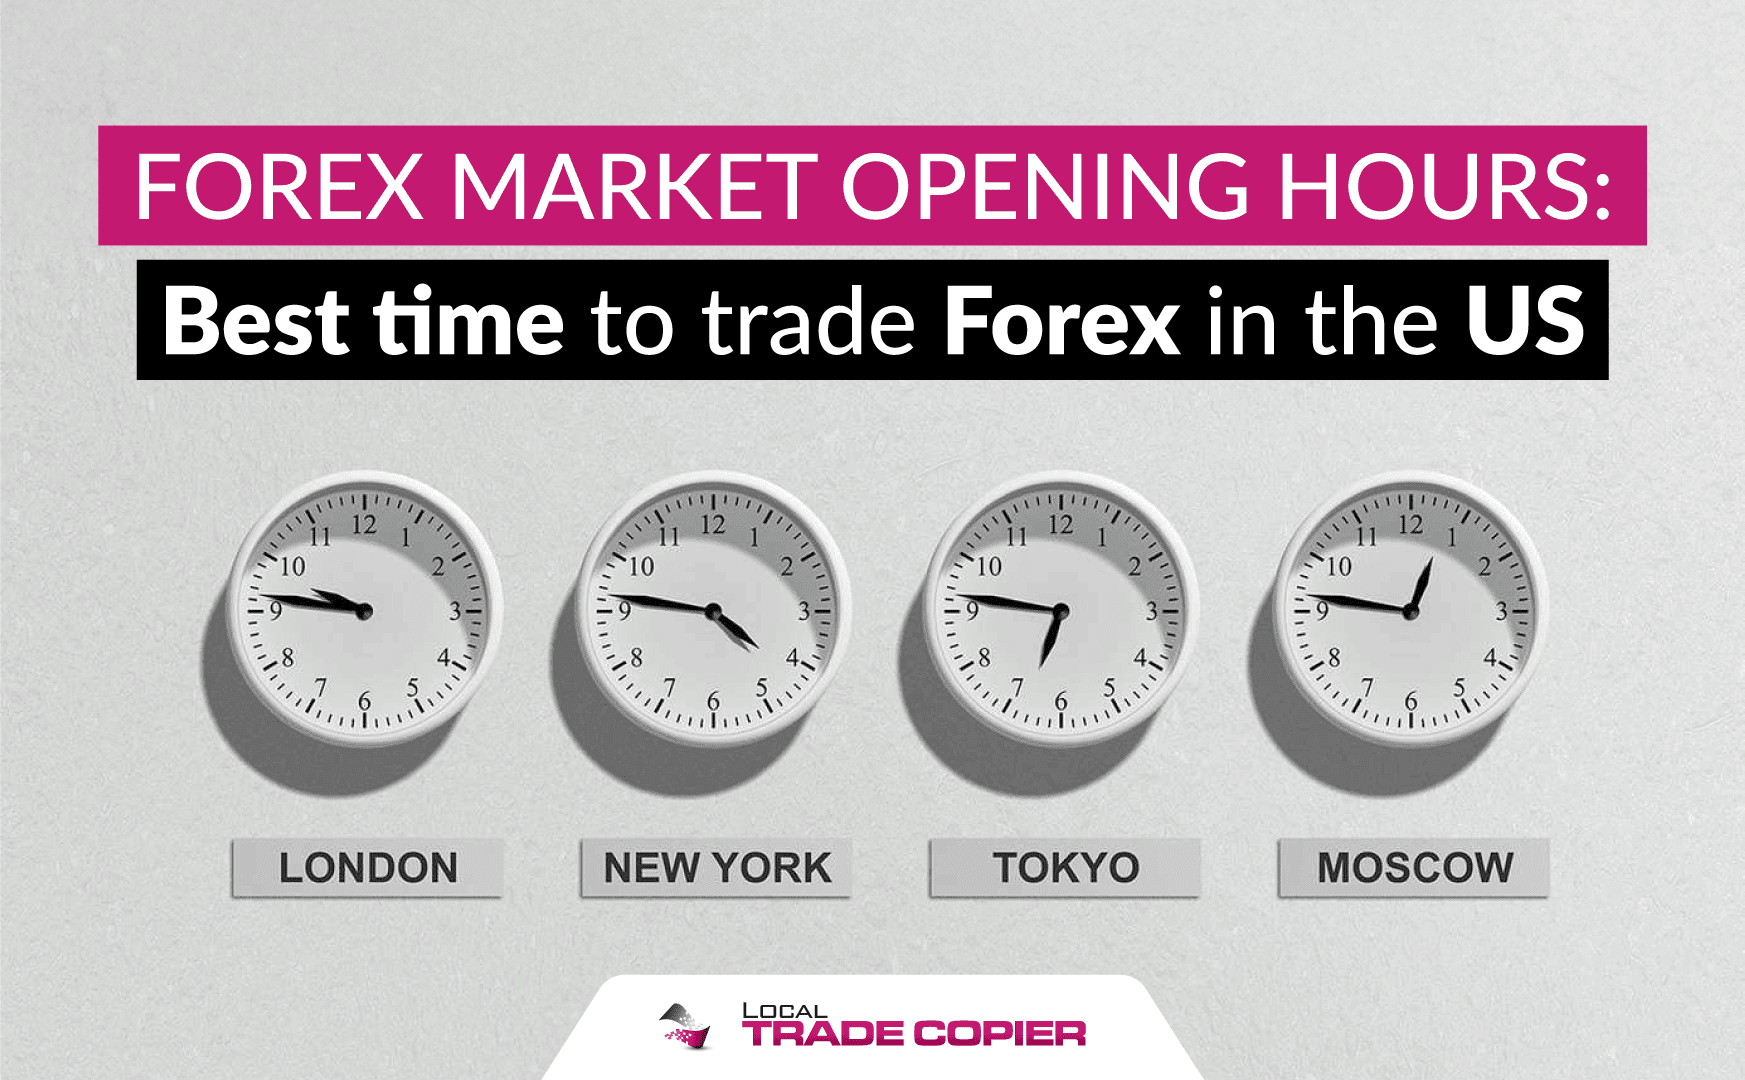 Forex market opening hours: Best time to trade Forex in the US